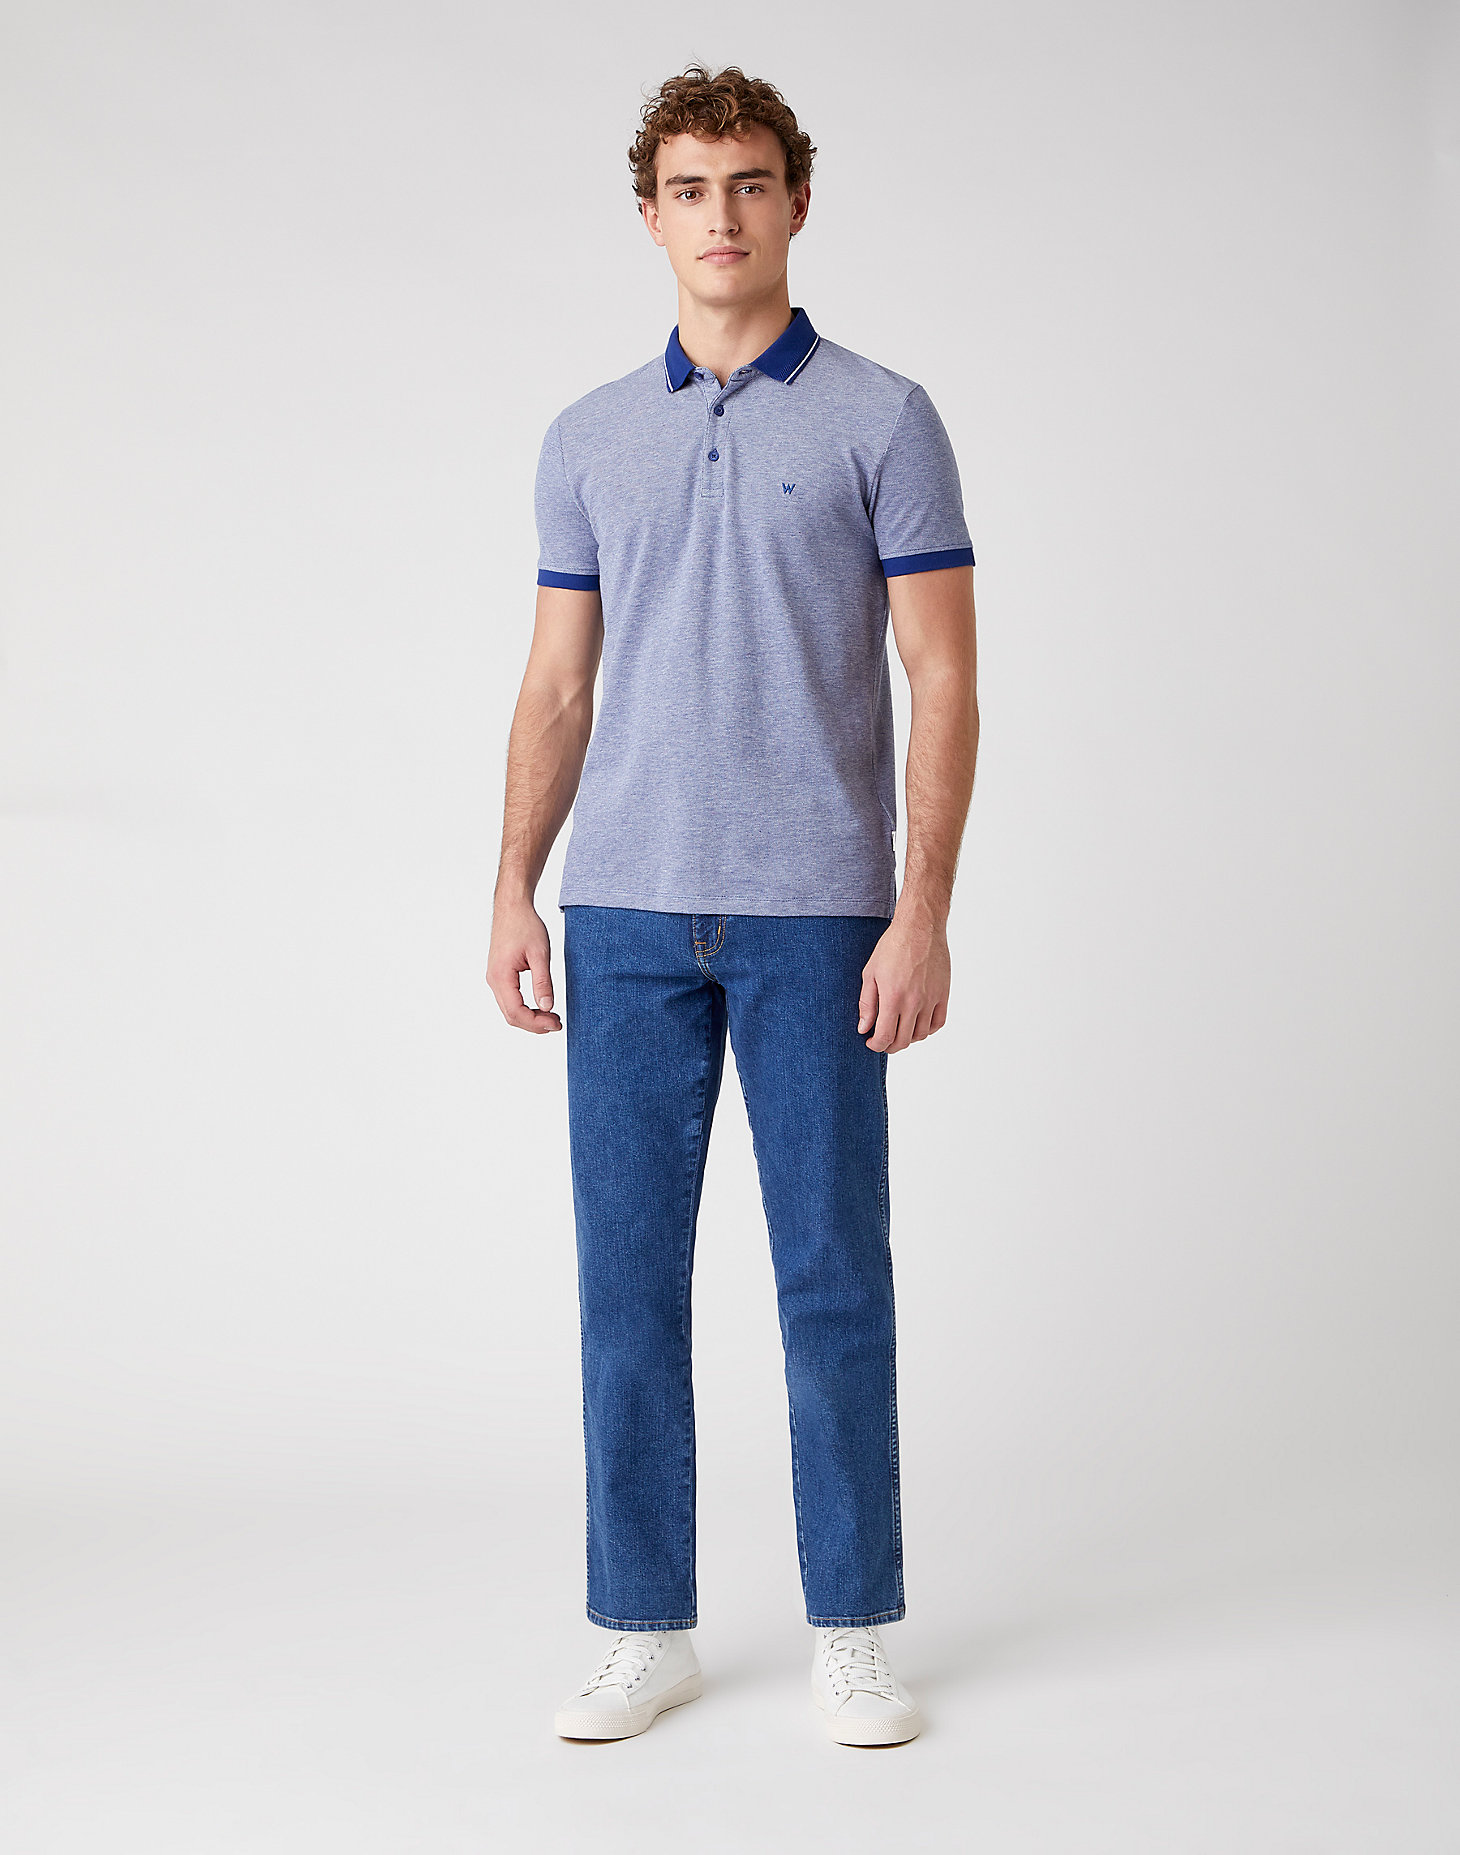 Short Sleeve Refined Polo in Twilight Blue 1 alternative view 1